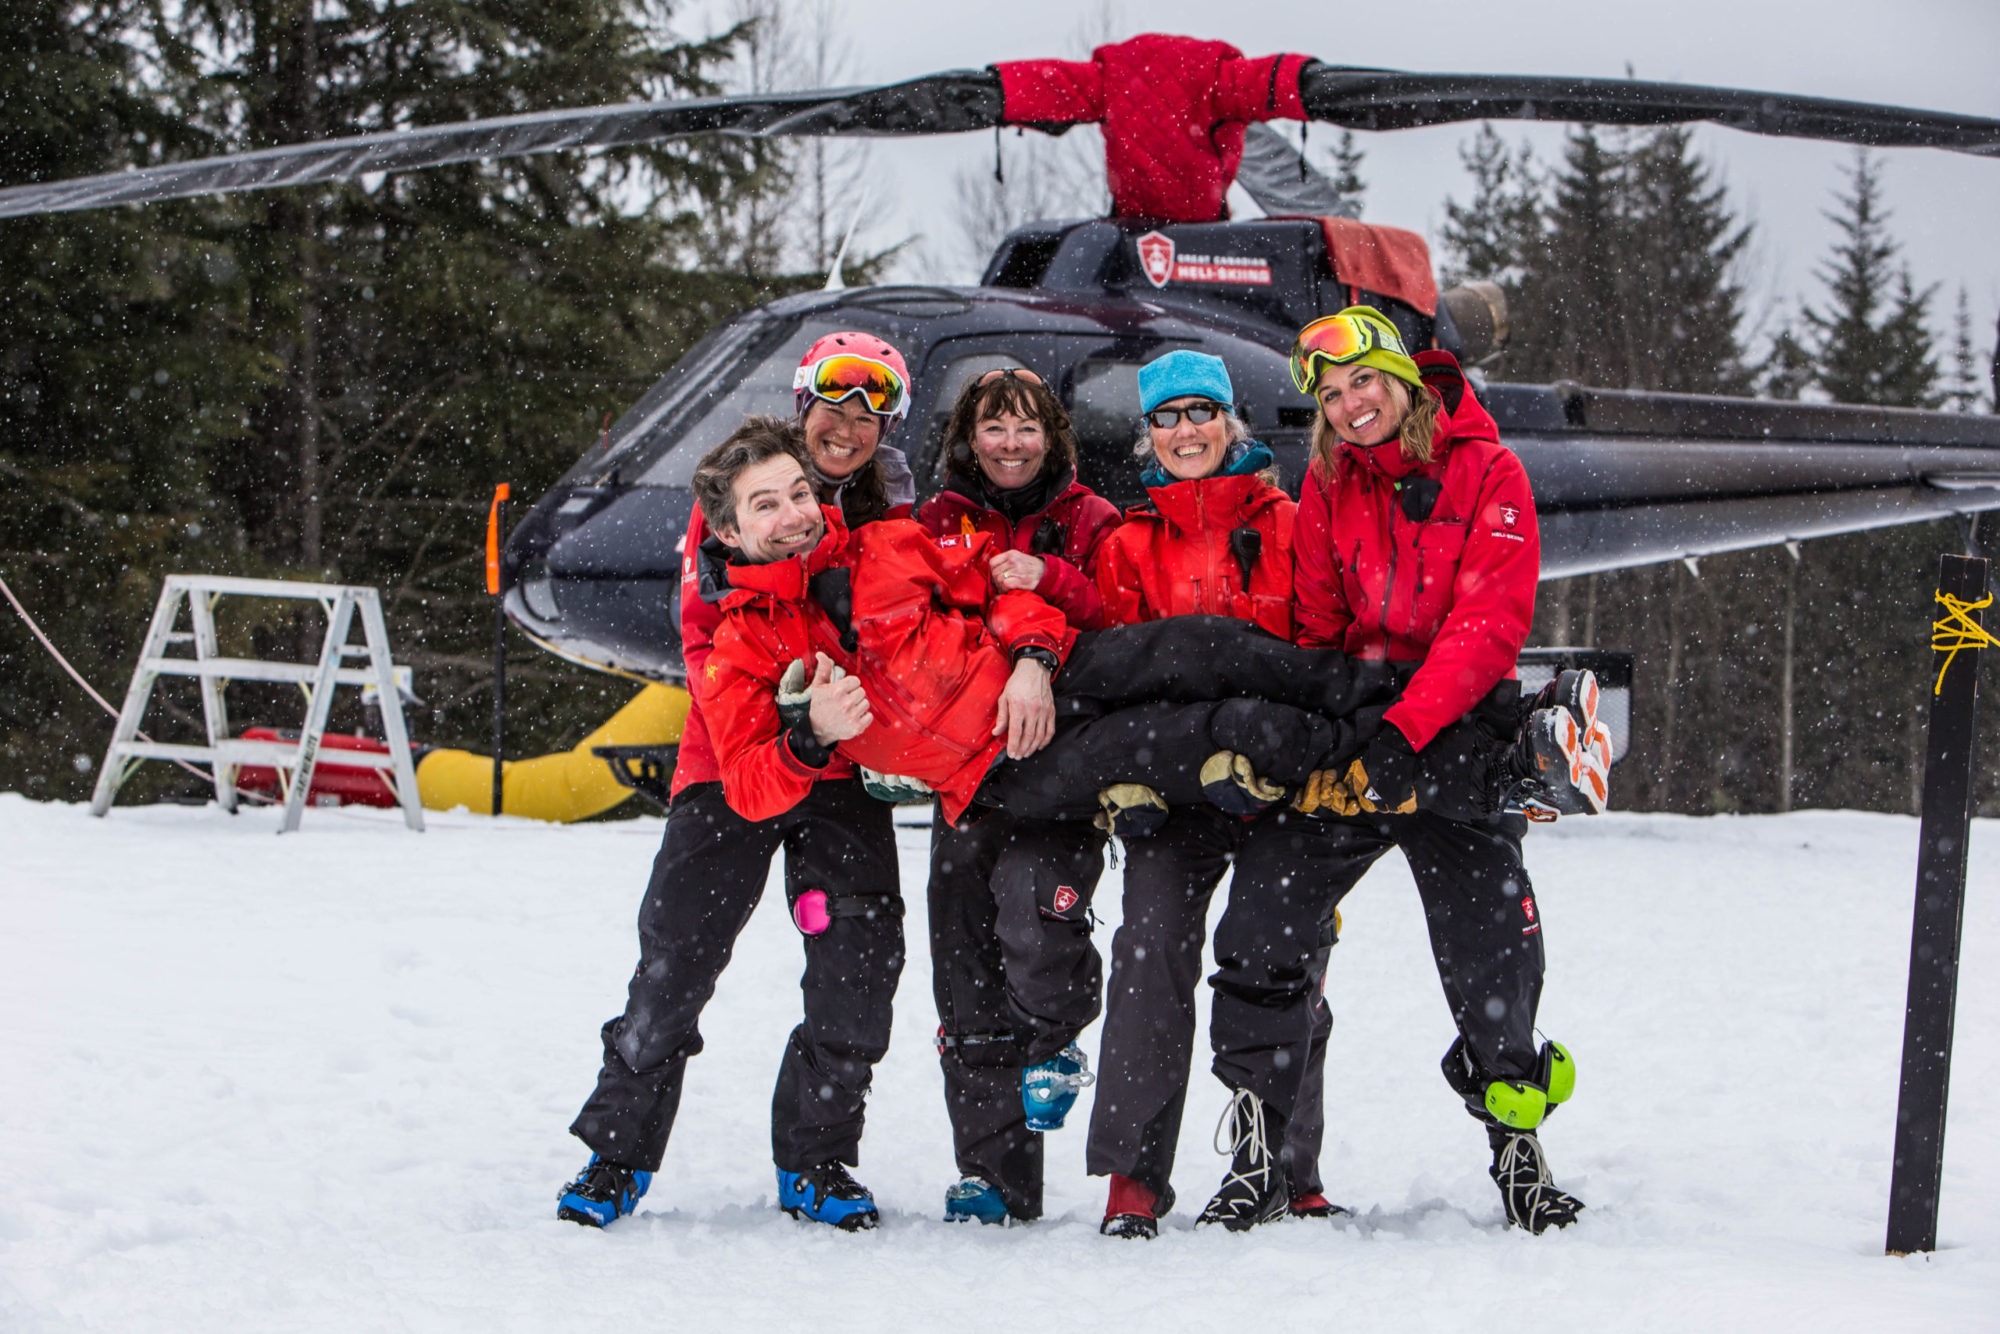 A group of skiiers smile in front of a helicopter